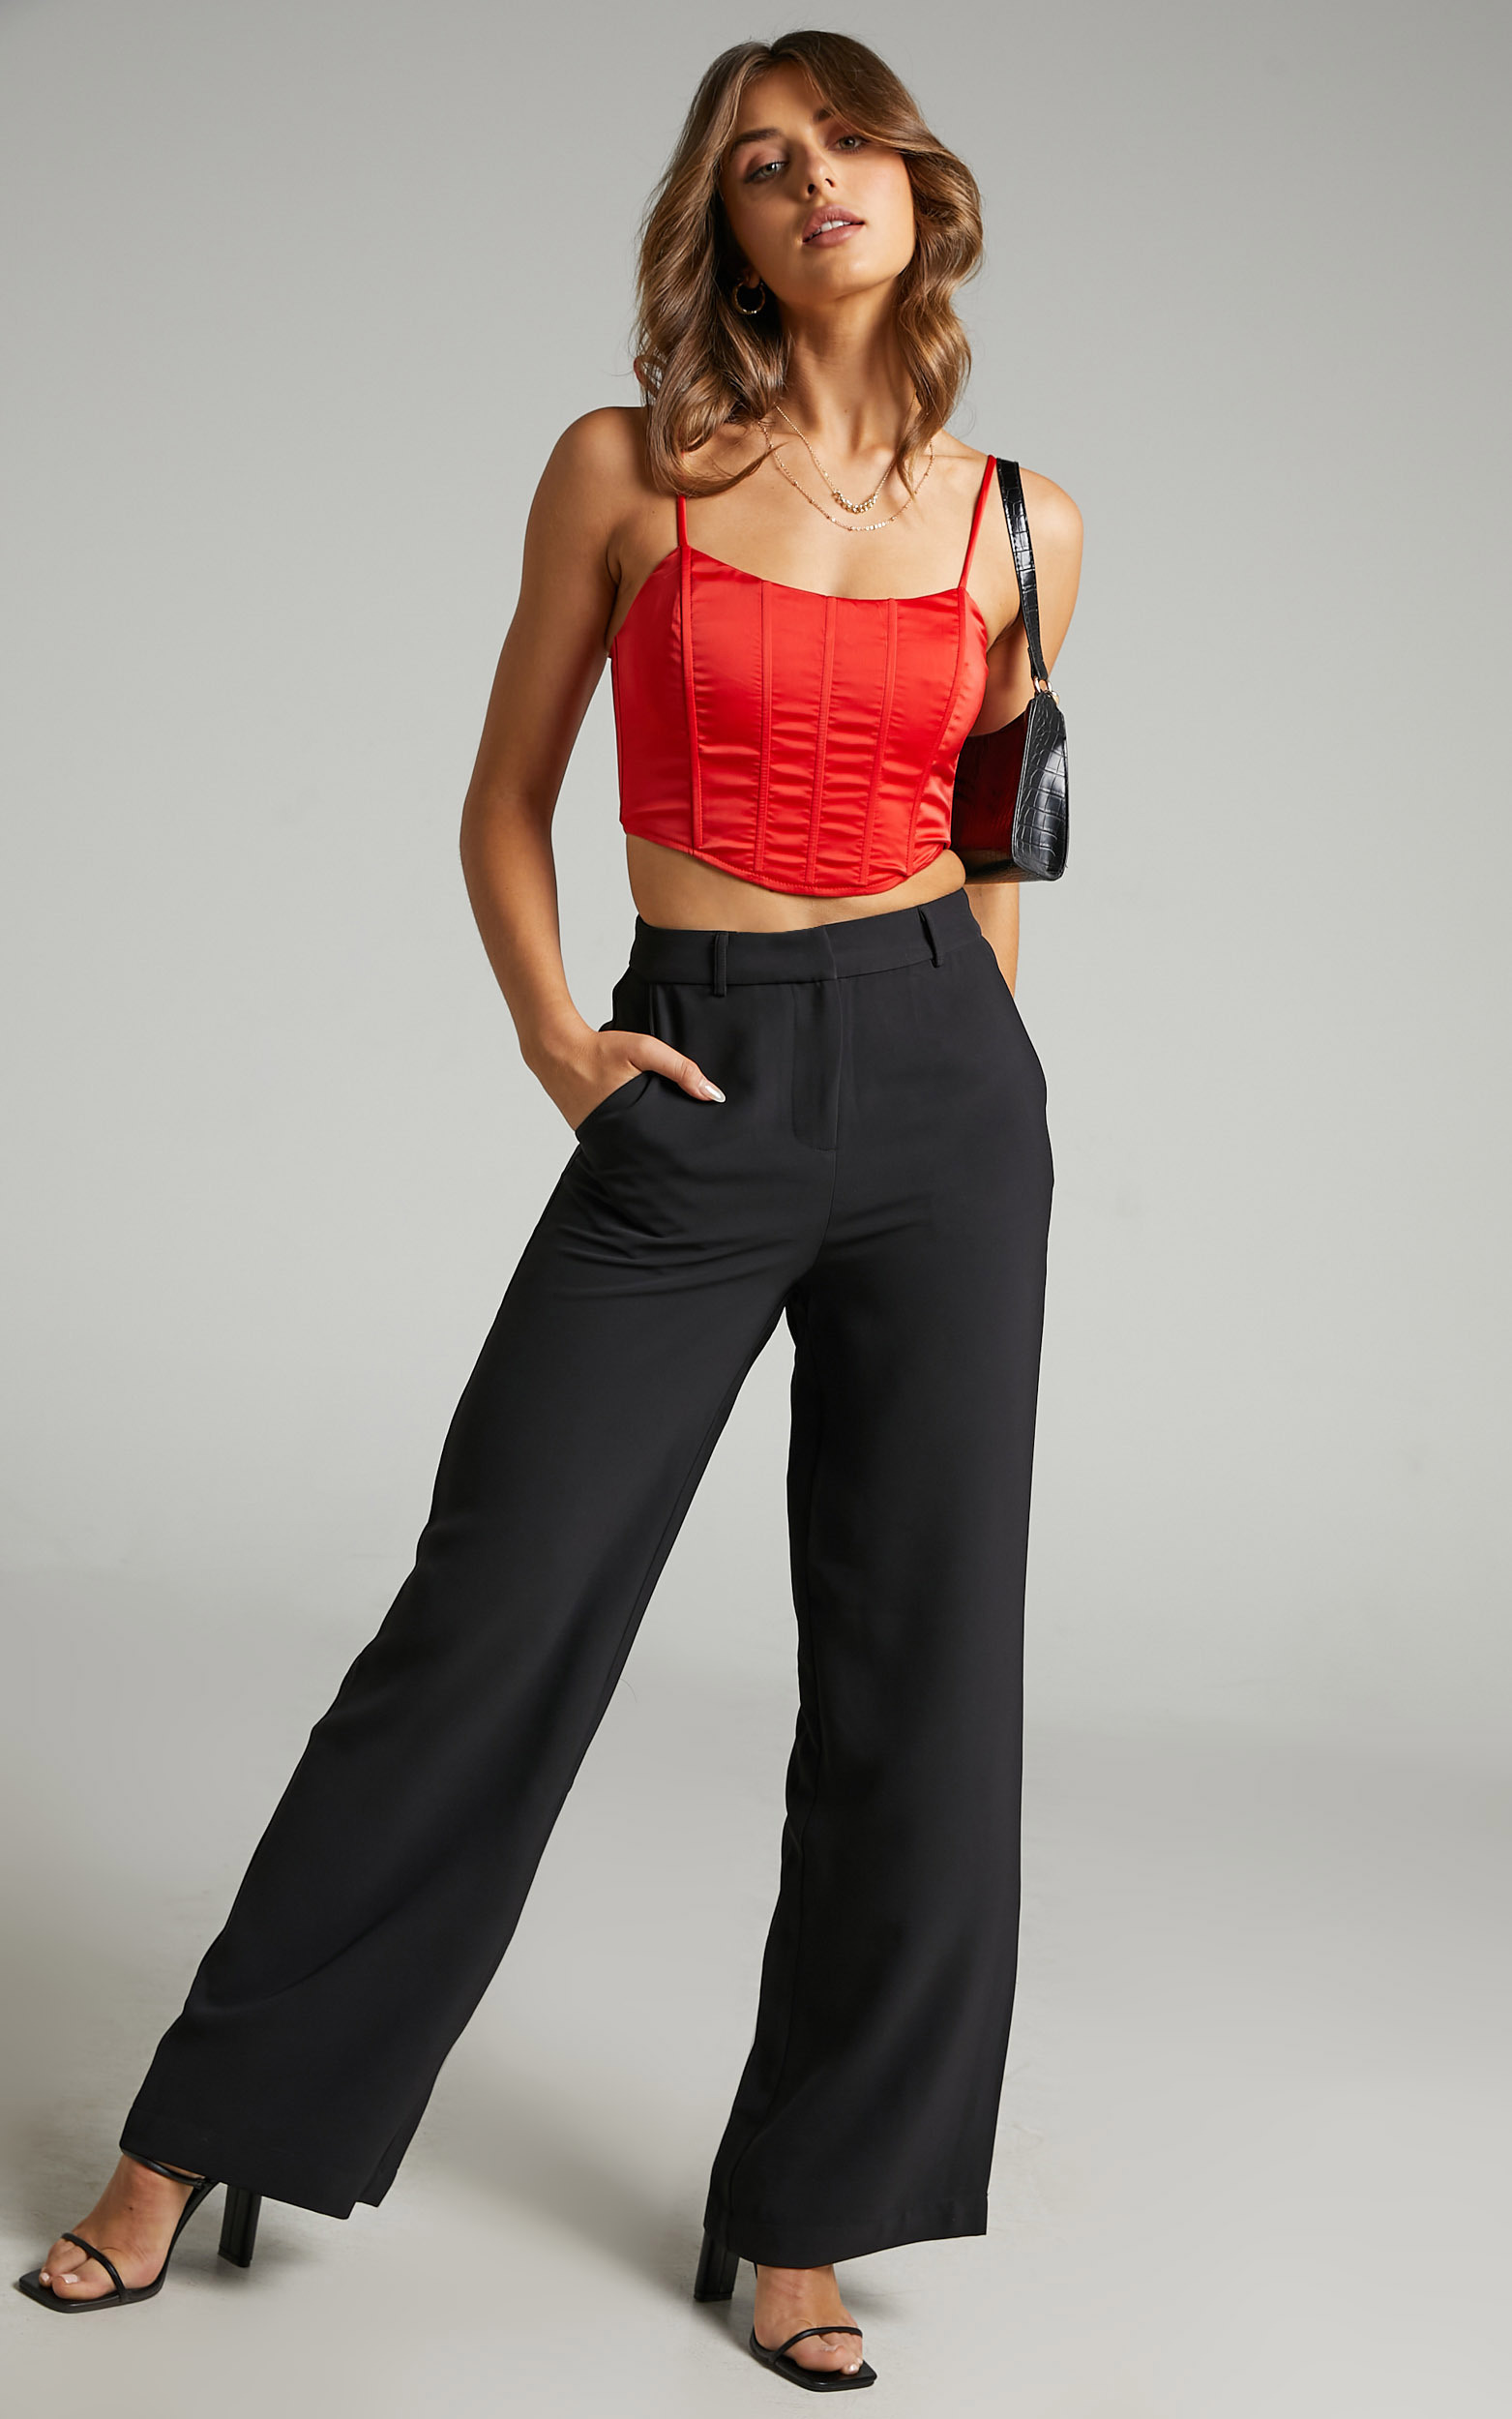 Bonnie Tailored Wide Leg Pants in Black - 06, BLK2, hi-res image number null